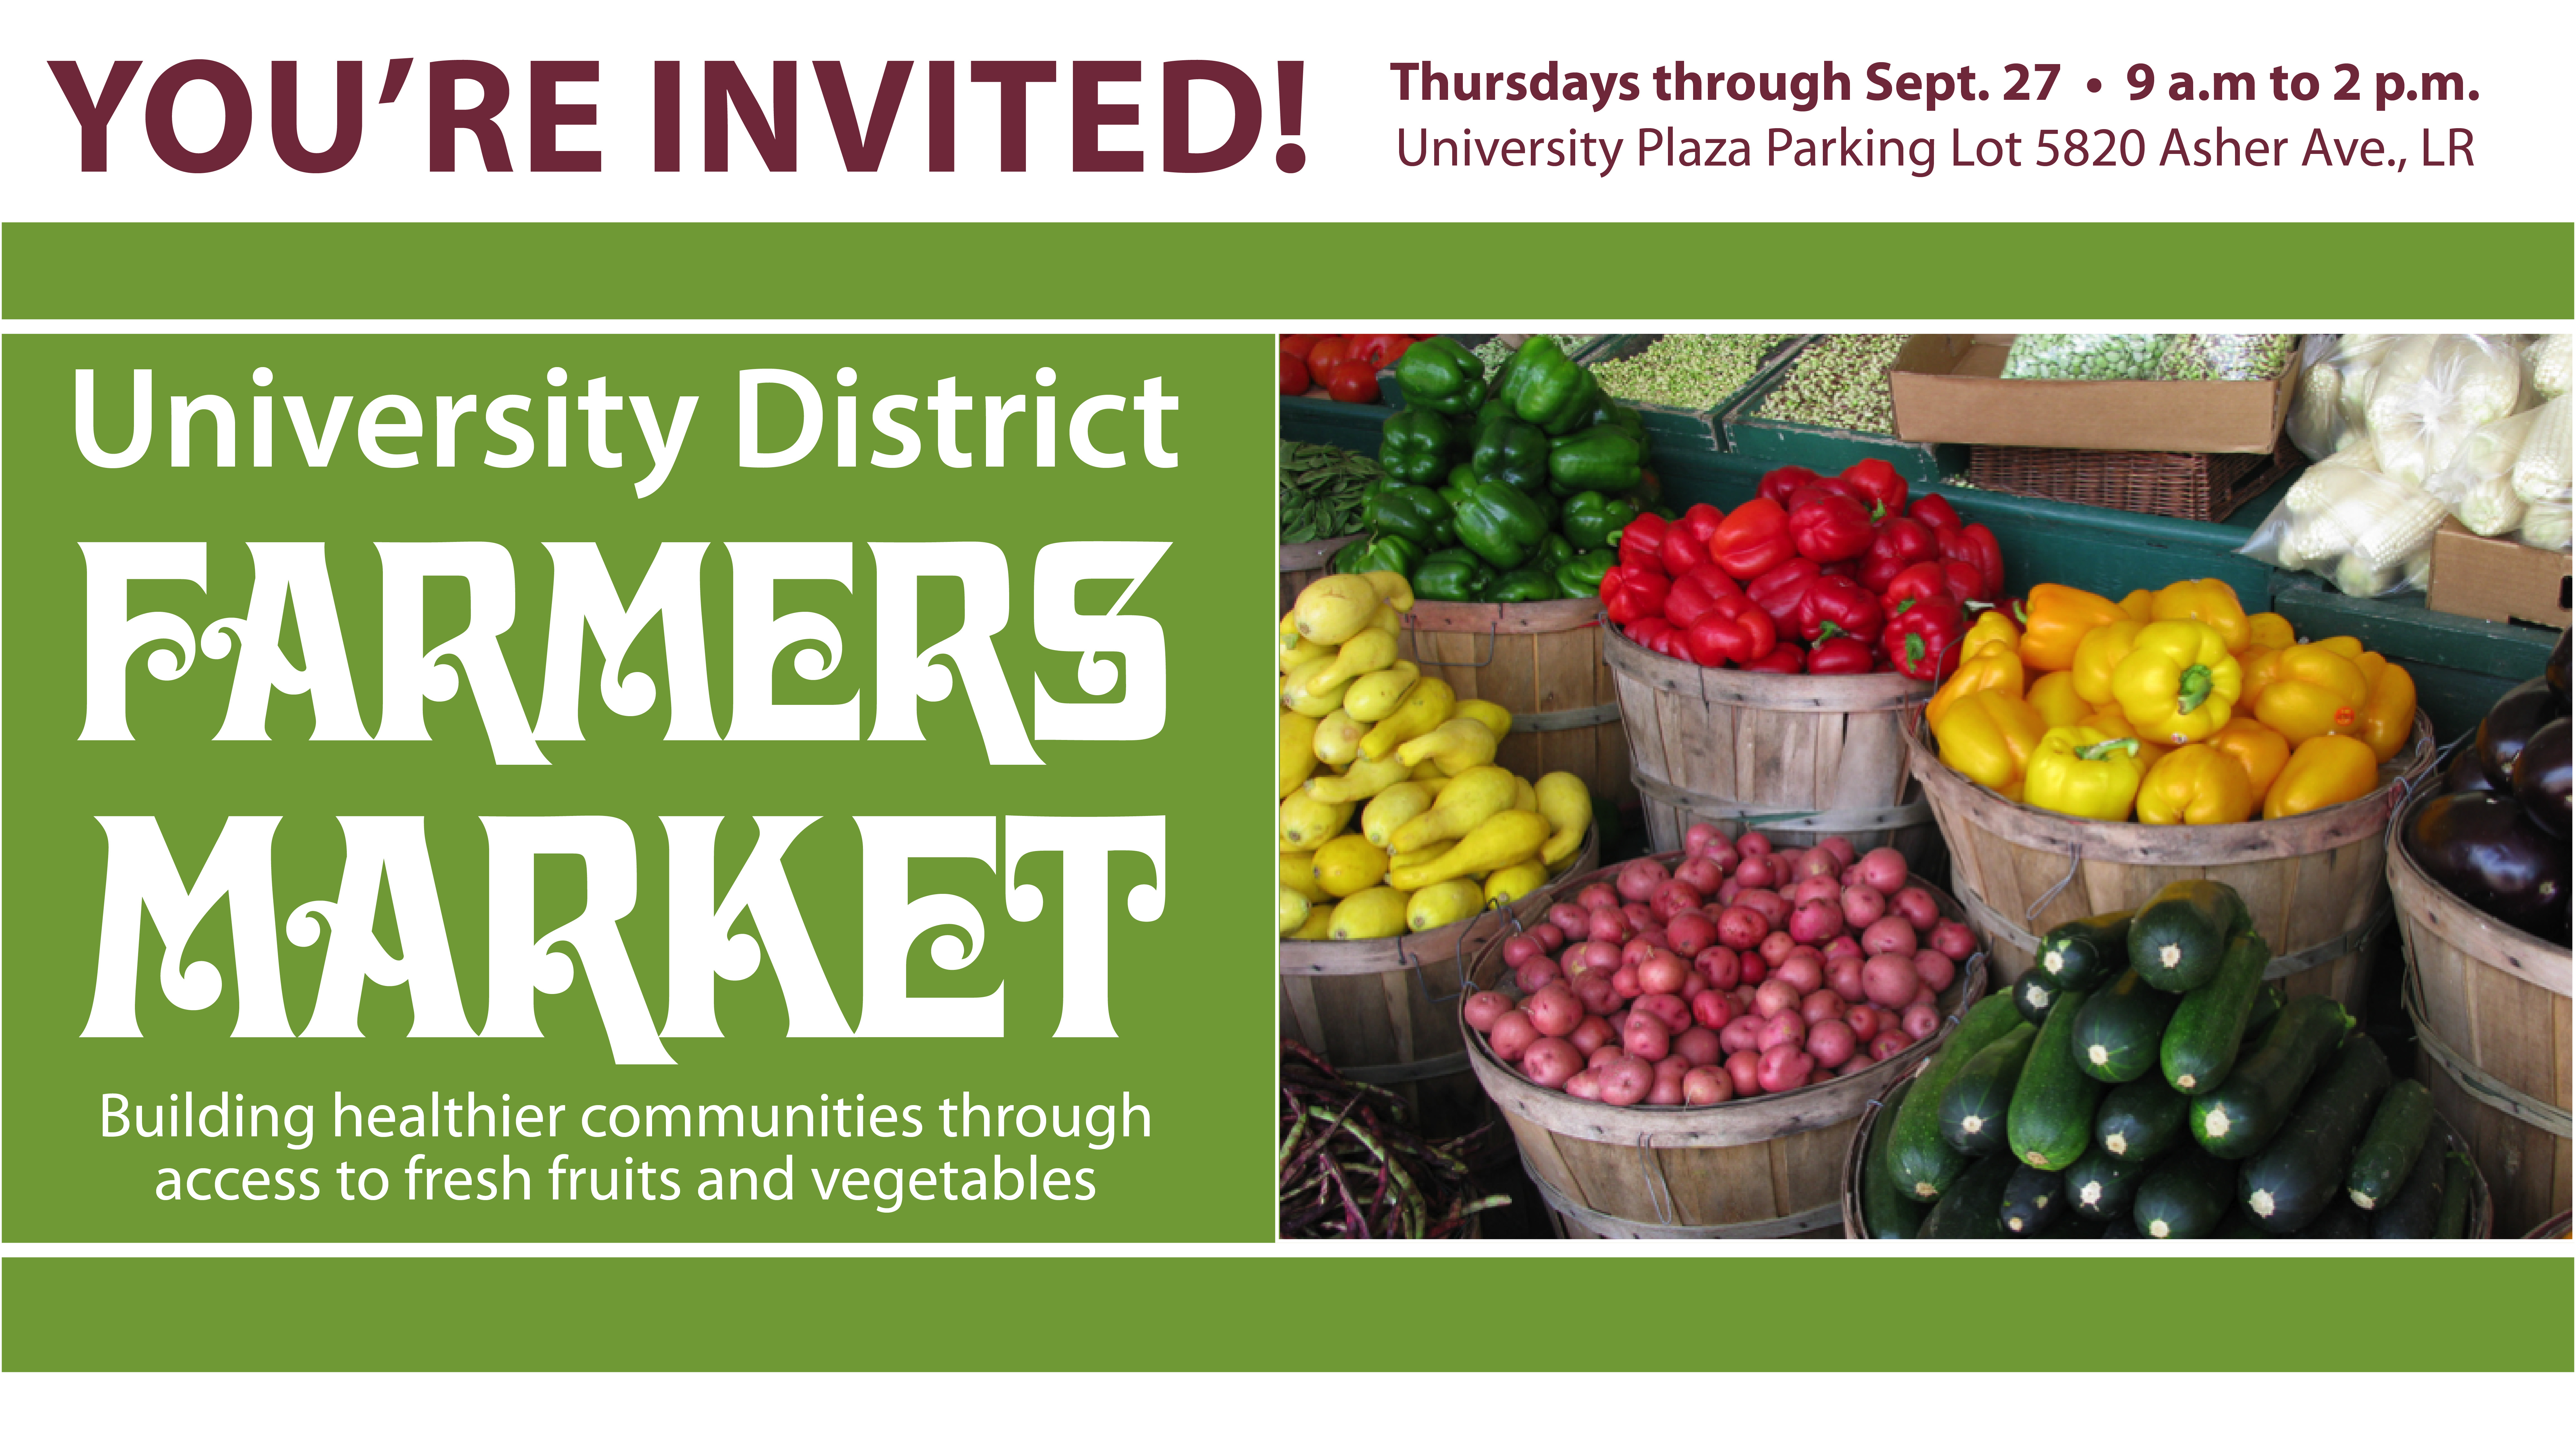 The farmers markets will be held from 9 a.m. to 2 p.m. every Thursday from May 10 to Sept. 27 in the University of Arkansas at Little Rock University Plaza Parking Lot at 5820 Asher Ave.